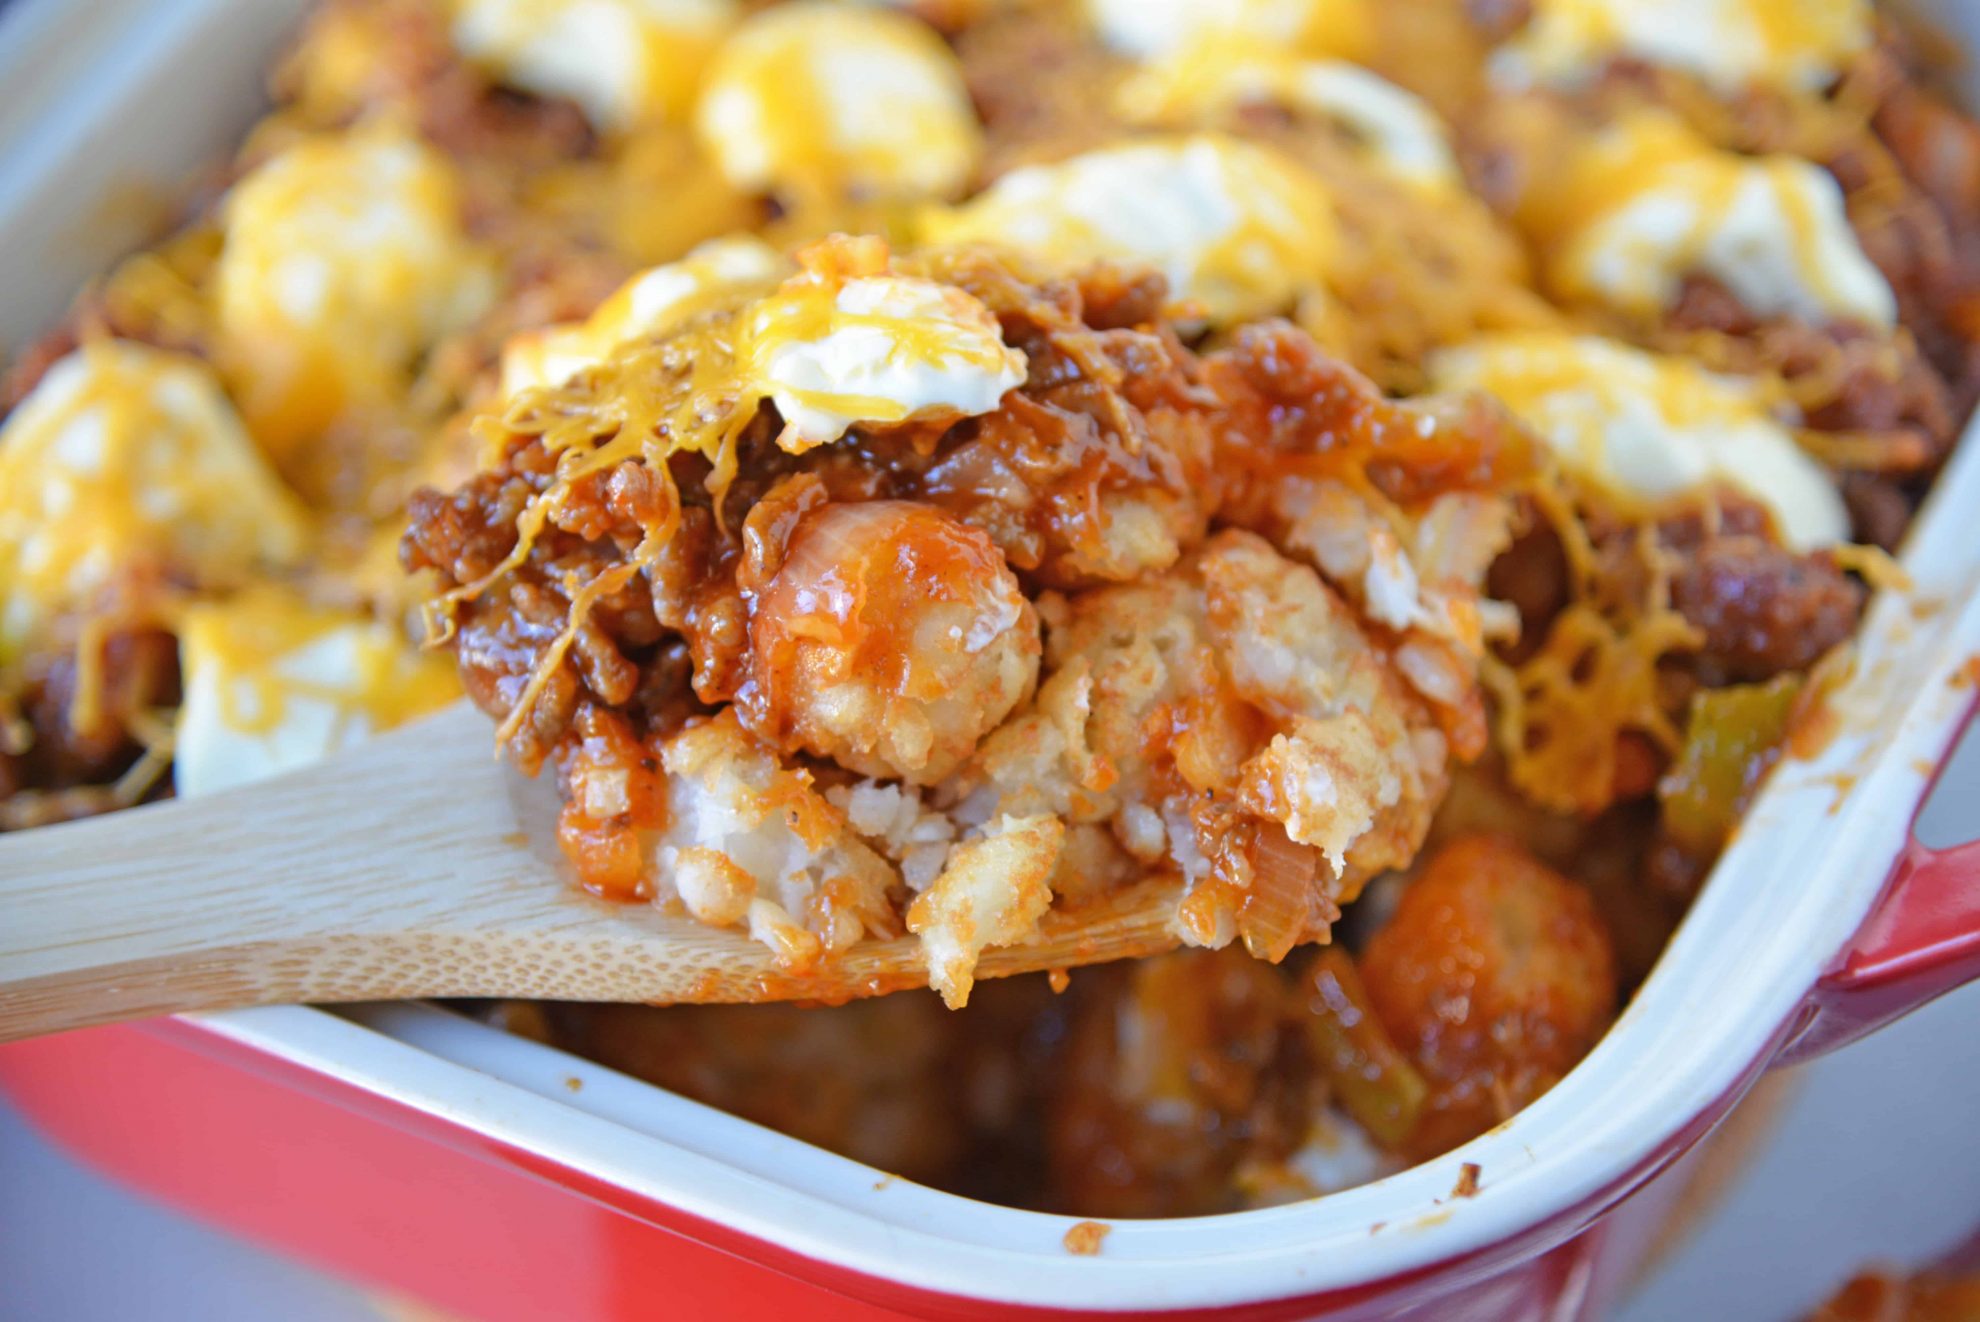 Sloppy Joe Tater Tot Casserole combines layers of crispy tater tots with homemade sloppy Joe mix, cream cheese and cheddar for the ultimate quick meal or party food! #tatertotcasserole #sloppyjoes www.savoryexperiments.com 